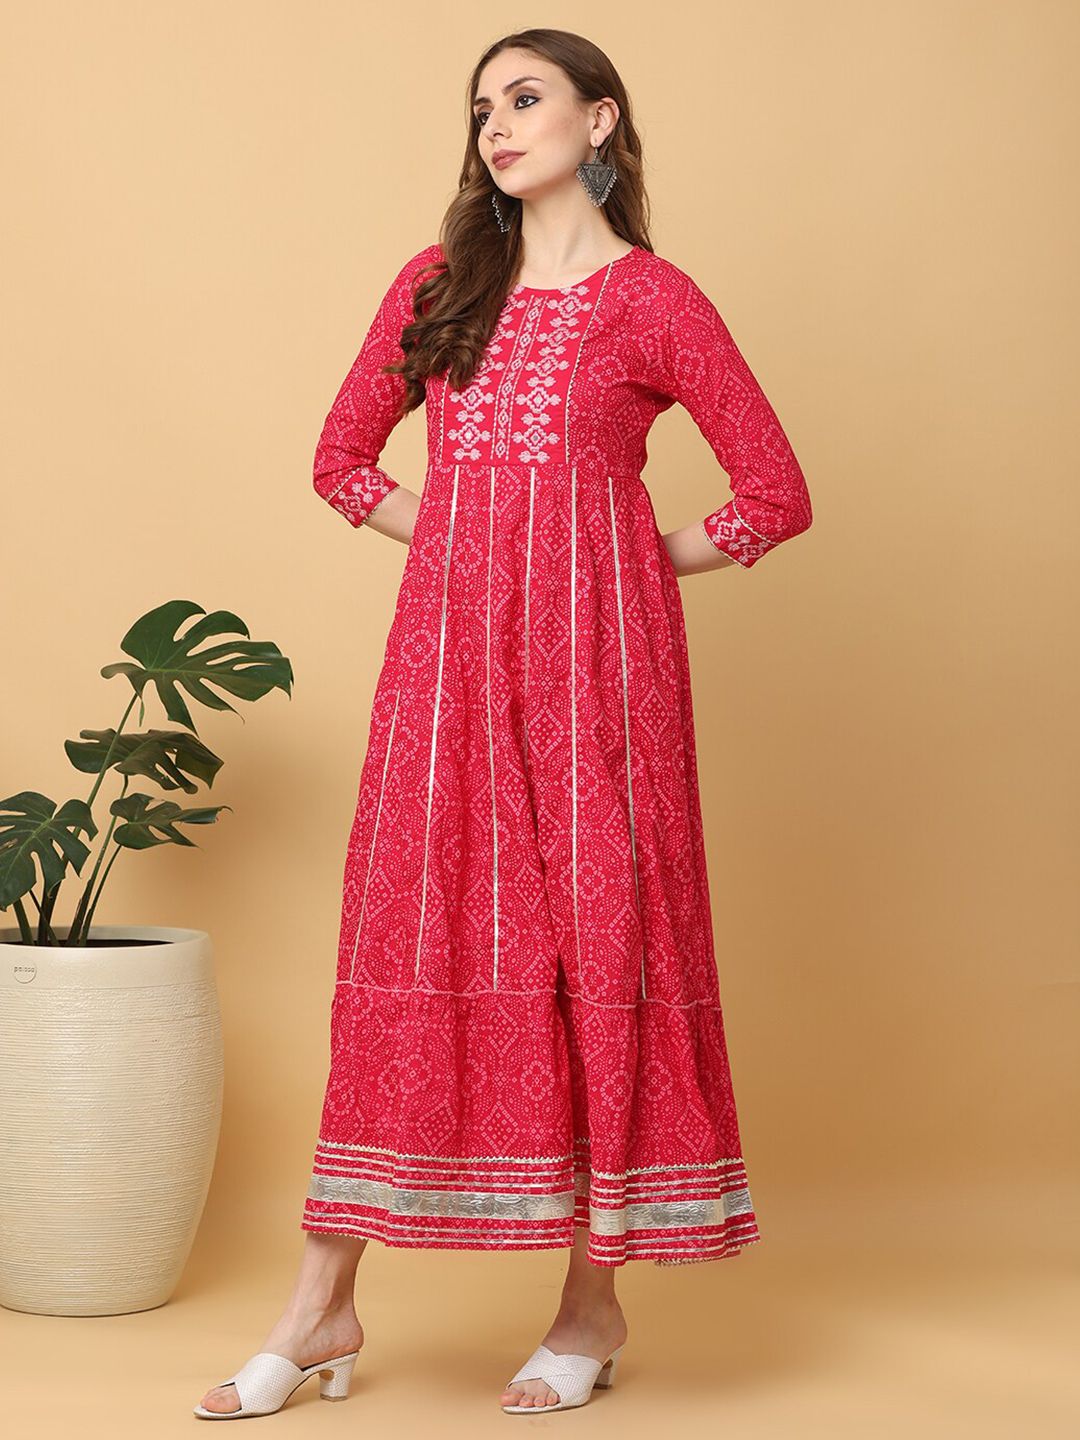 KALINI Pink Floral A-Line Three-Quarter Dress Price in India